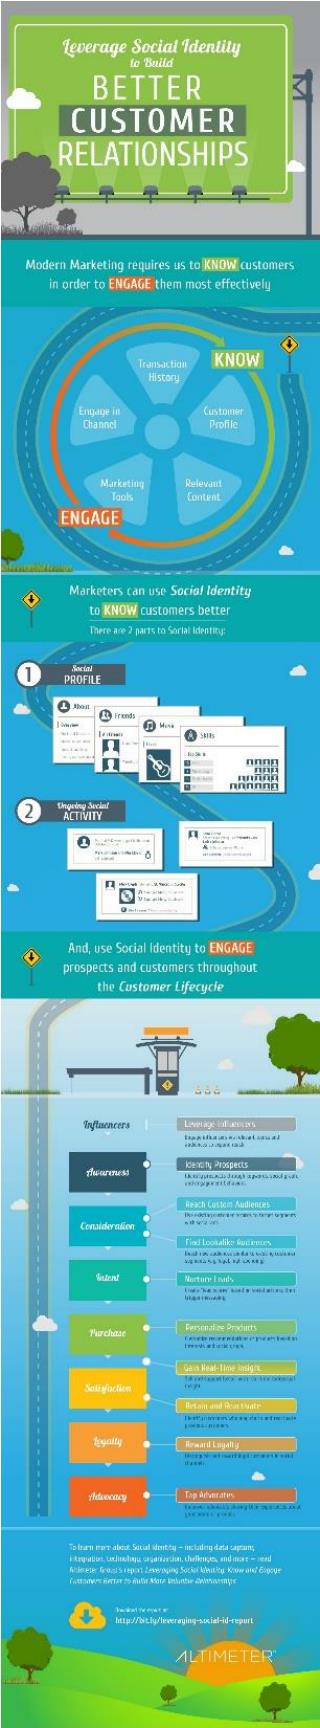 [Infographic] Leverage Social Identity to Build Better Customer Relationships by Altimeter Group